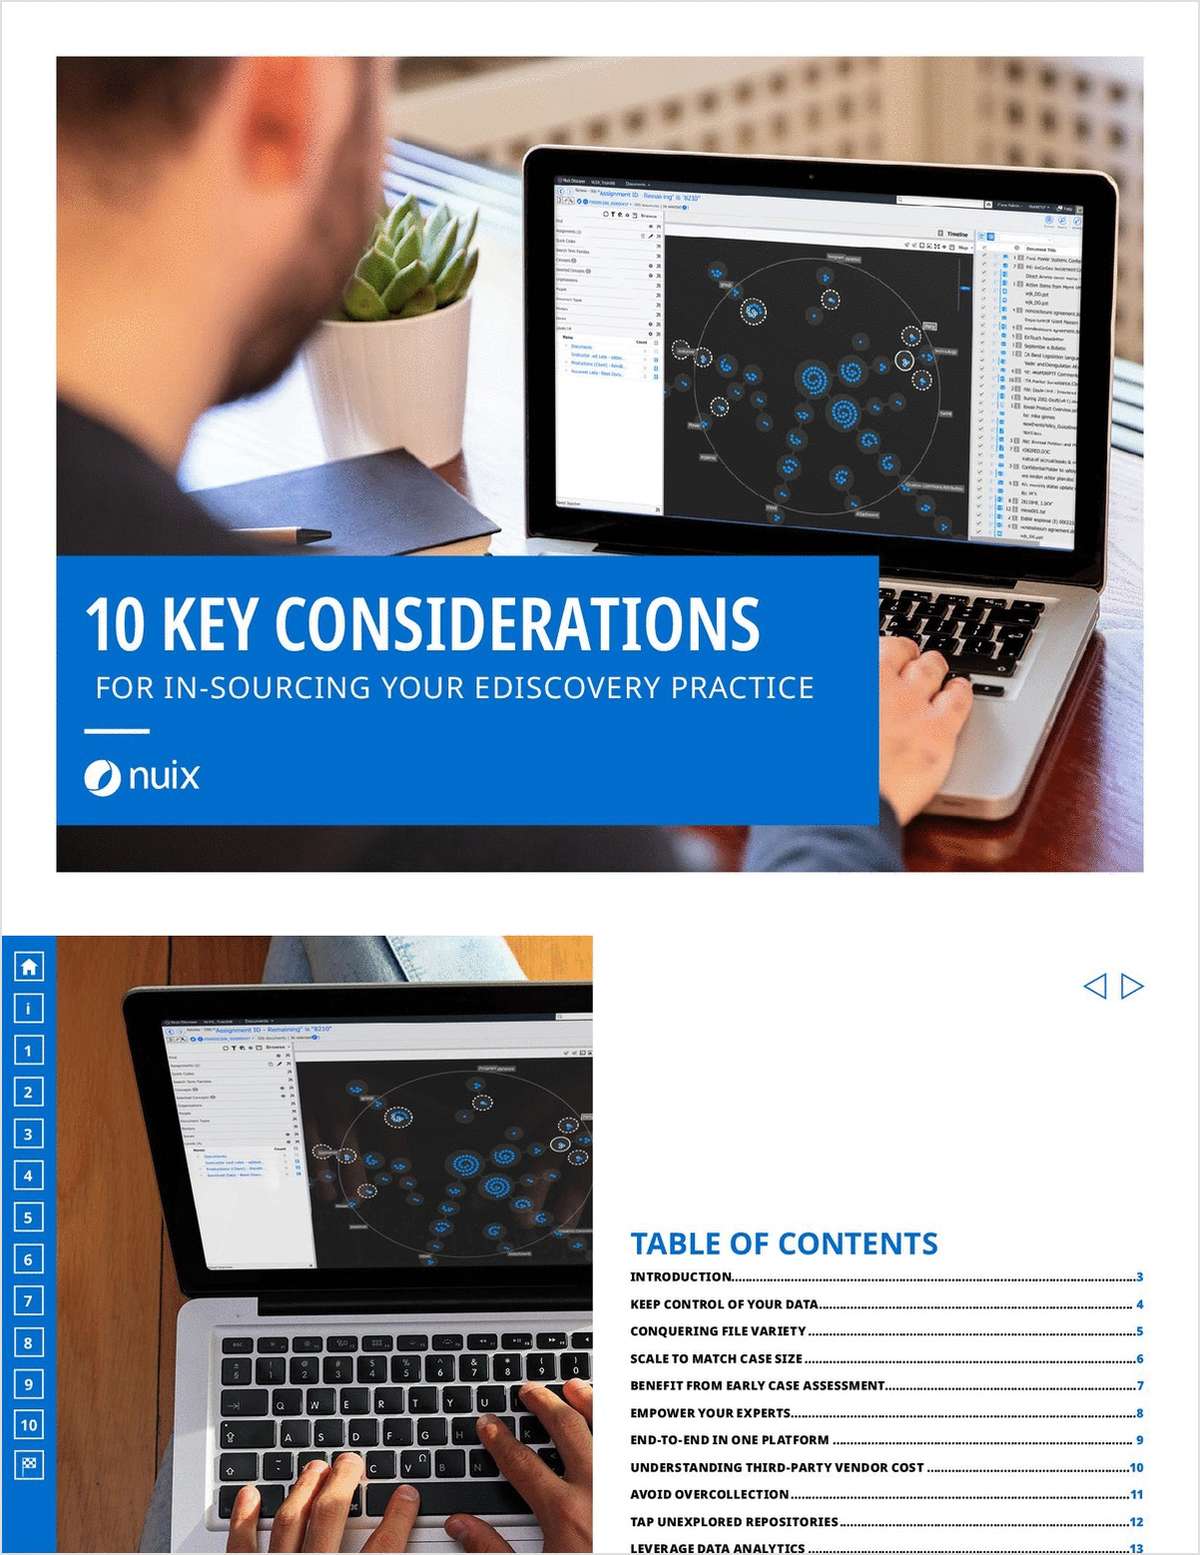 Is it time your company built up its internal eDiscovery program? Bringing litigation processes in-house could save you millions on redundant data processing and review. But it will require planning, patience and technology that supports your business needs. Download this guide for what to consider and avoid when insourcing eDiscovery.